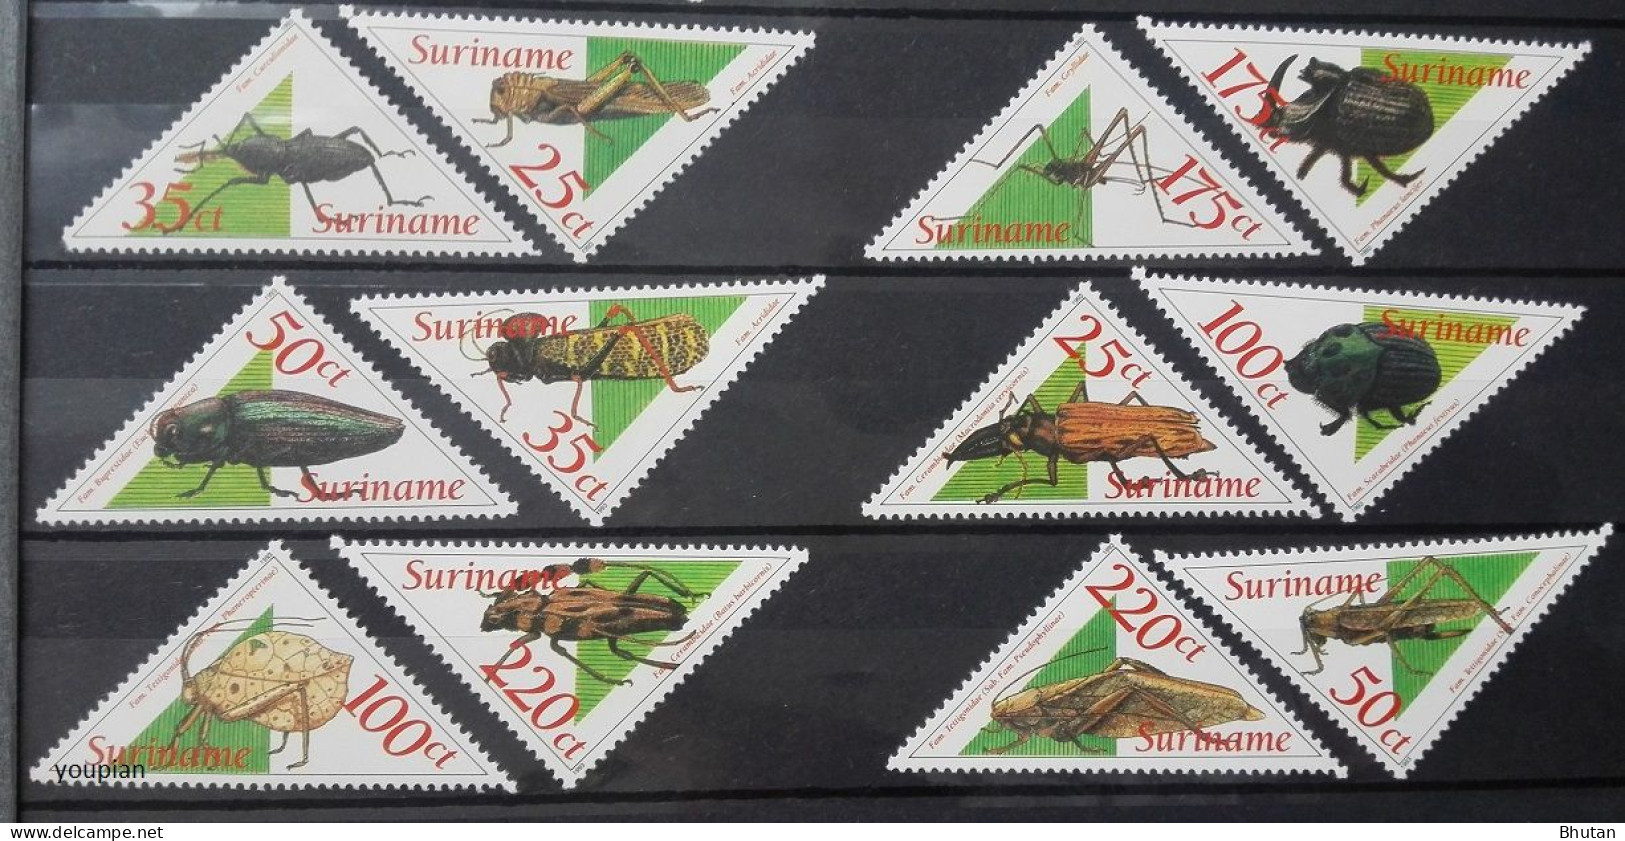 Suriname 1993, Insects, MNH Unusual Stamps Set - Surinam